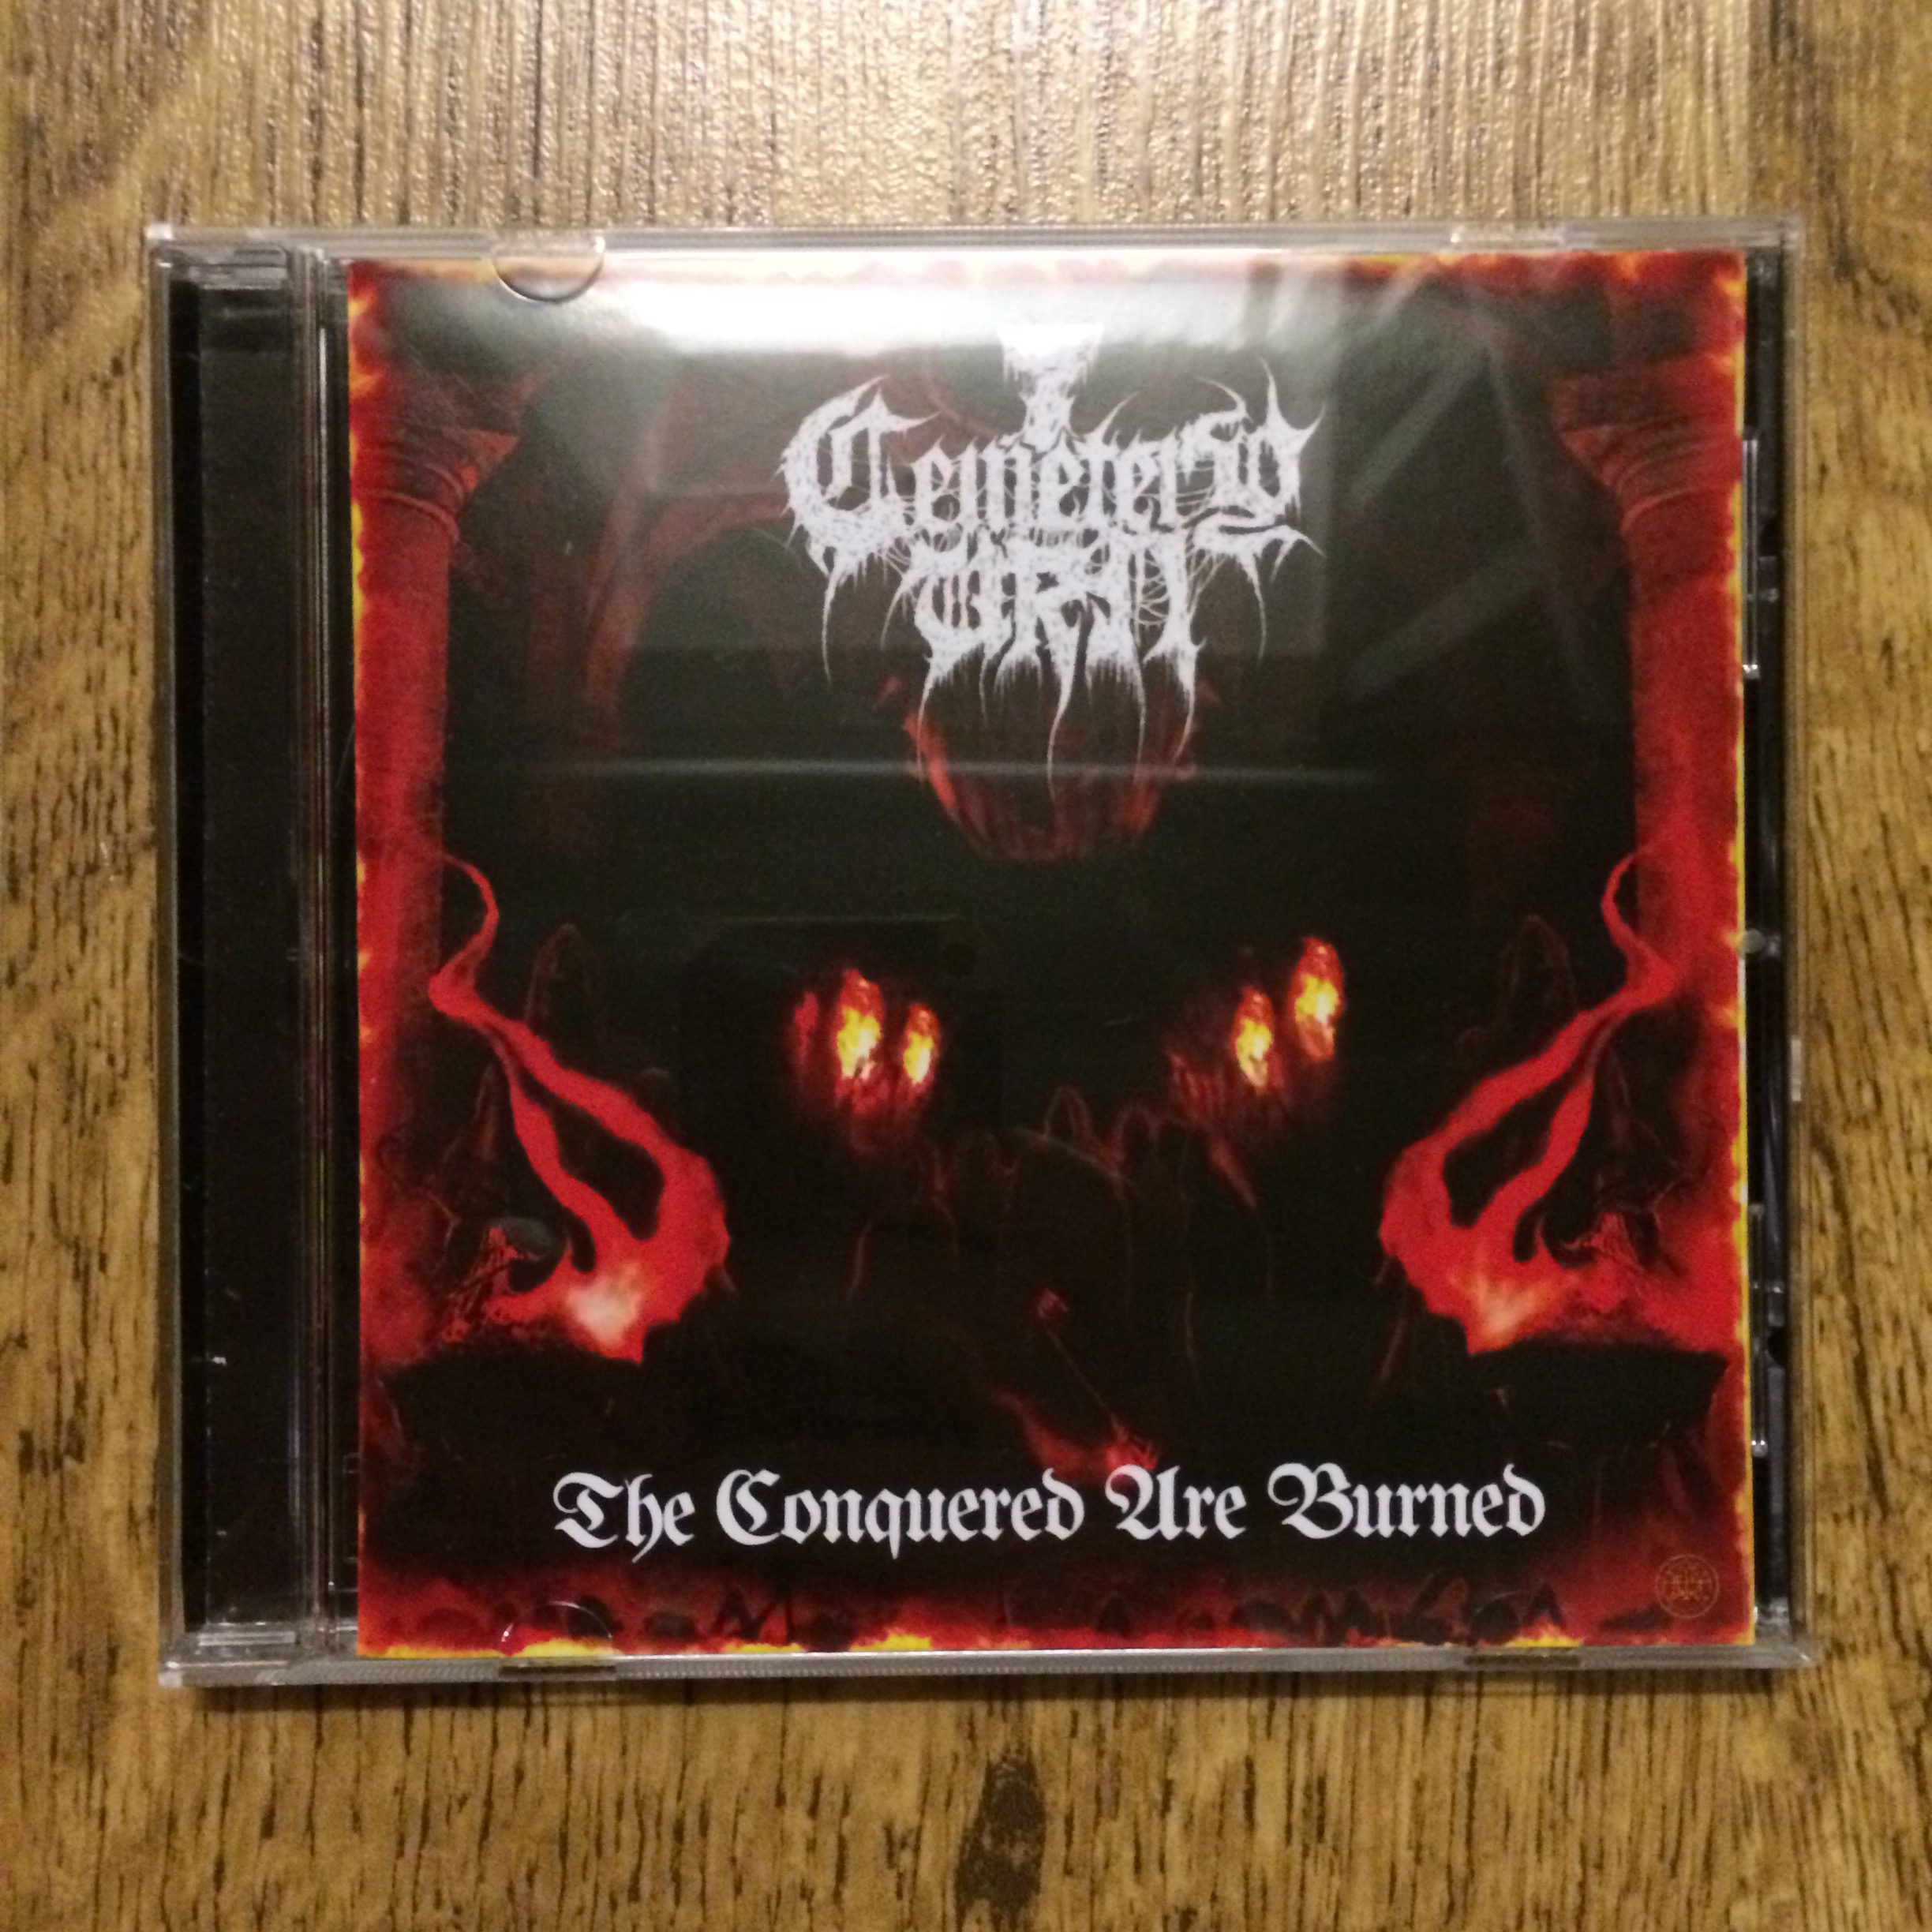 Photo of the Cemetery Urn - "The Conquered Are Burned" CD